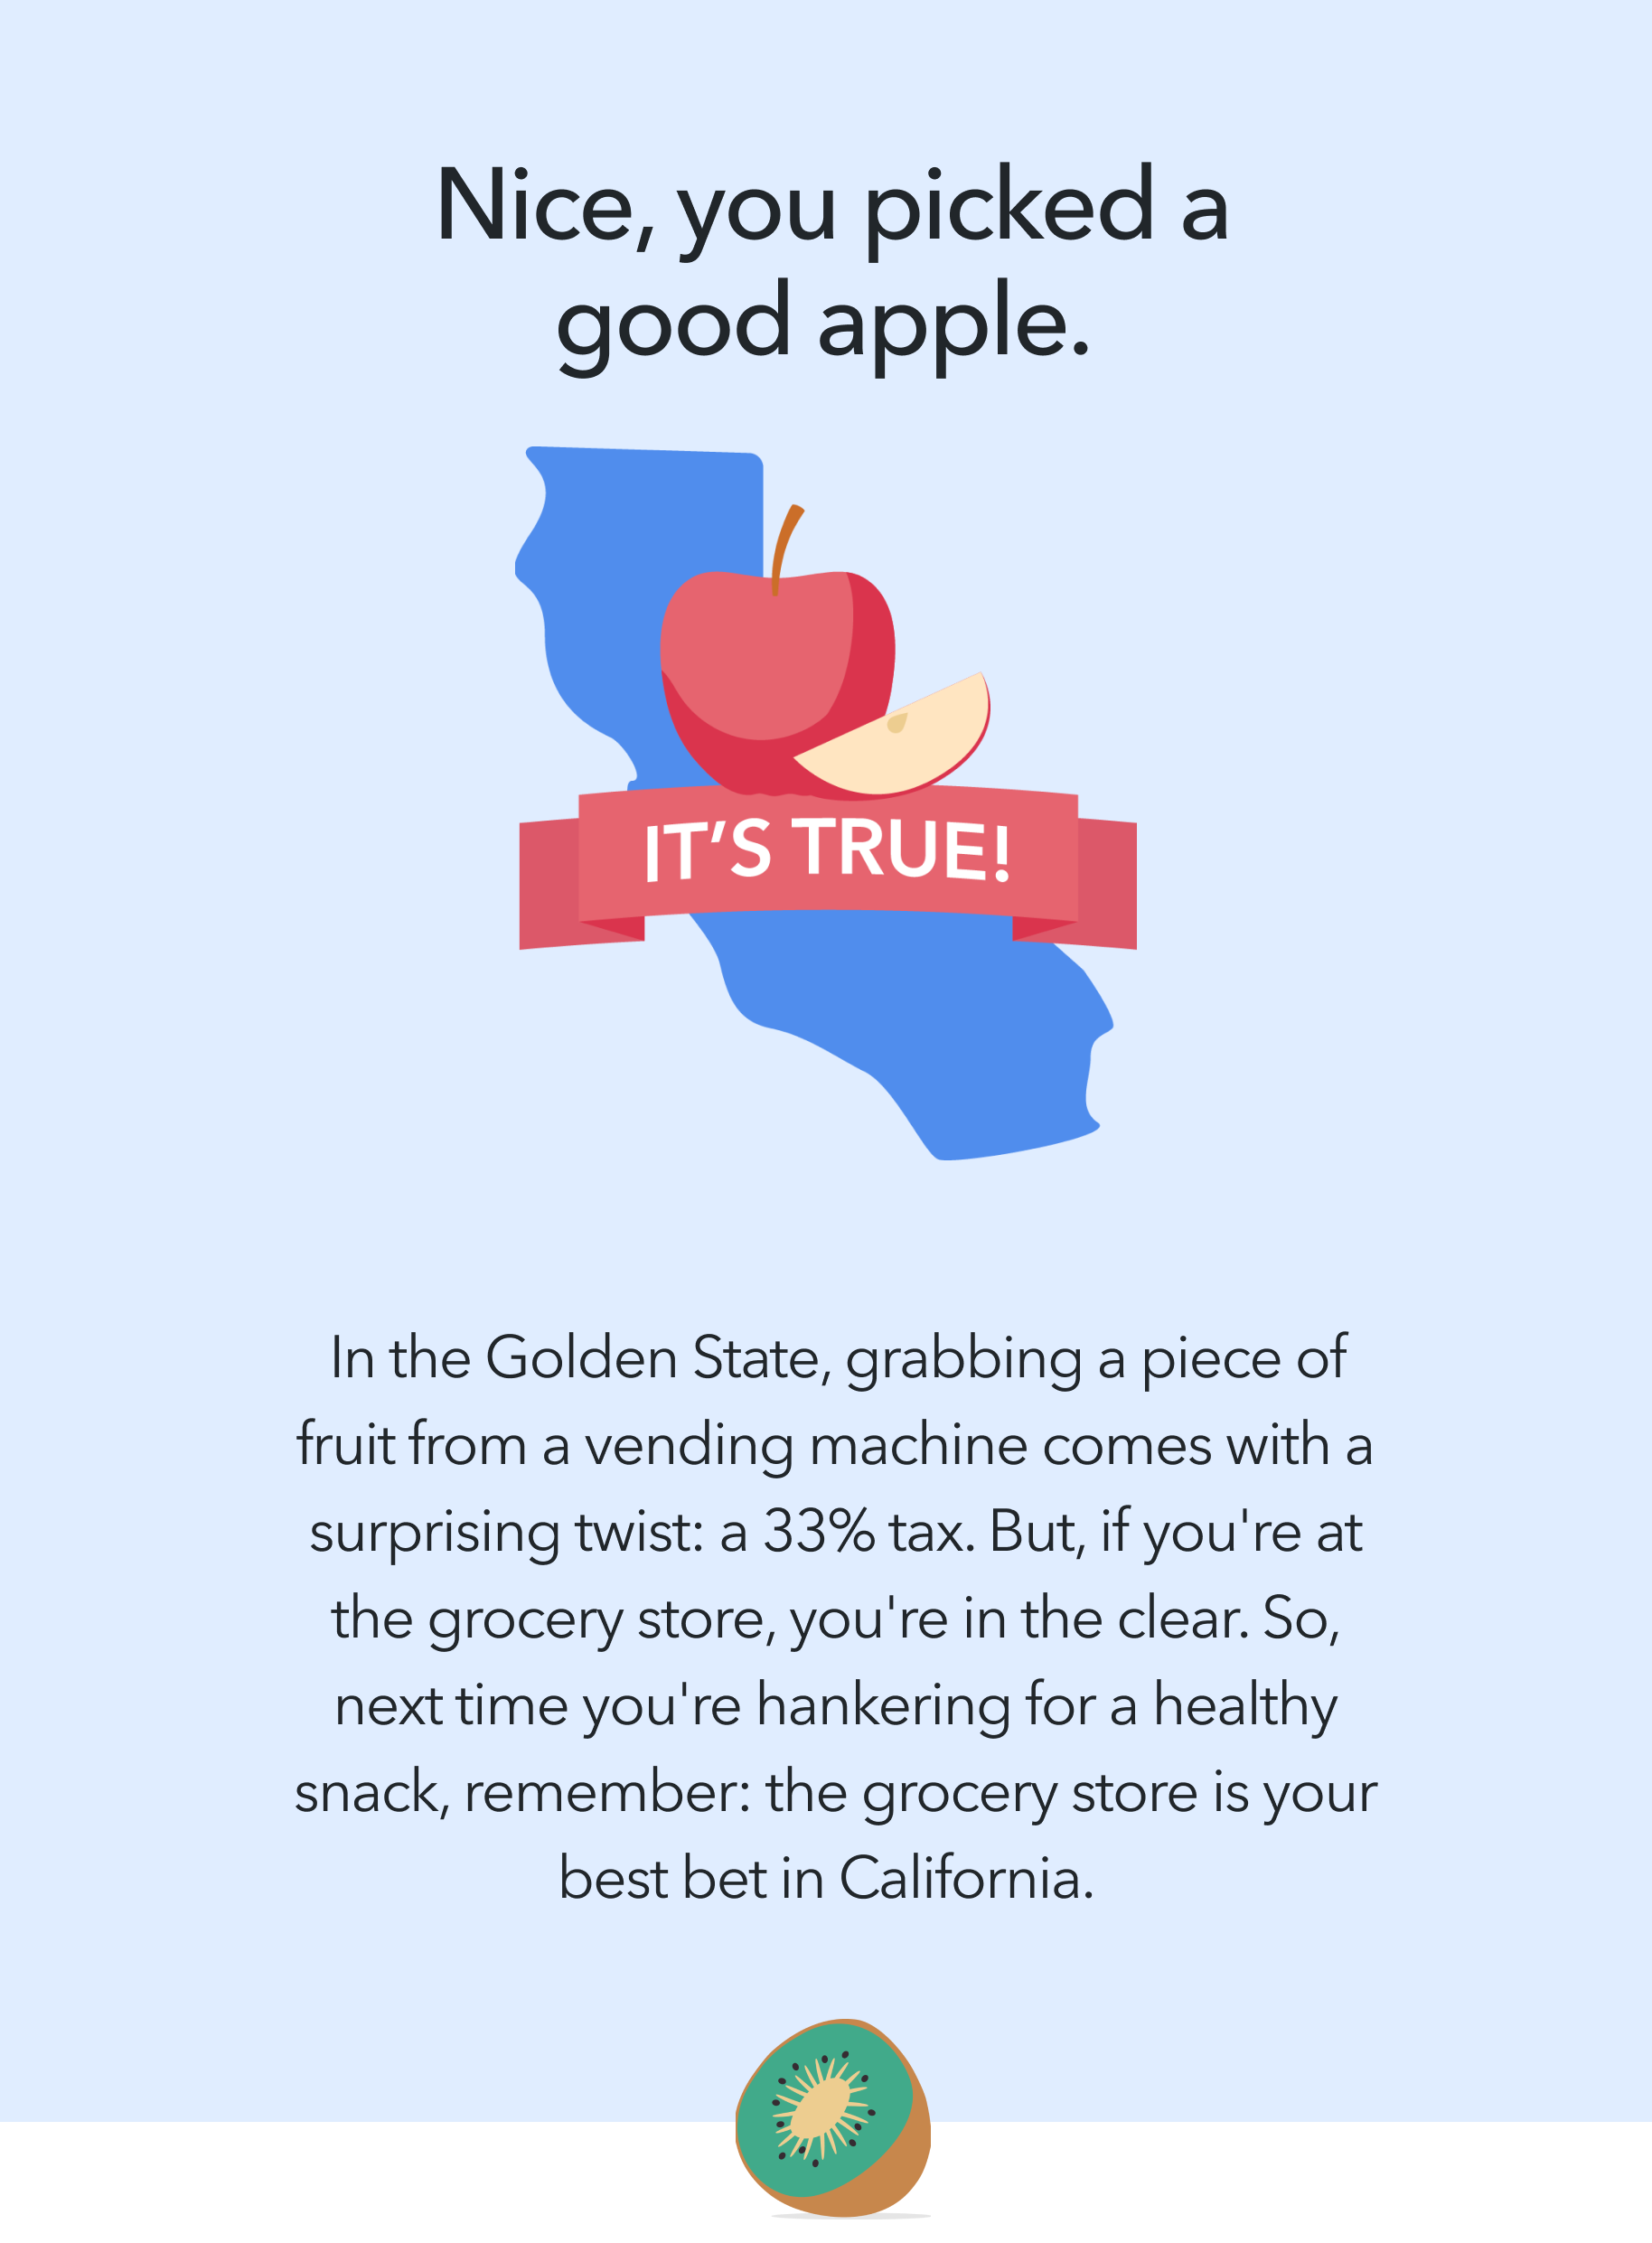 Nice, you picked a good apple. Intuit TurboTax Blog